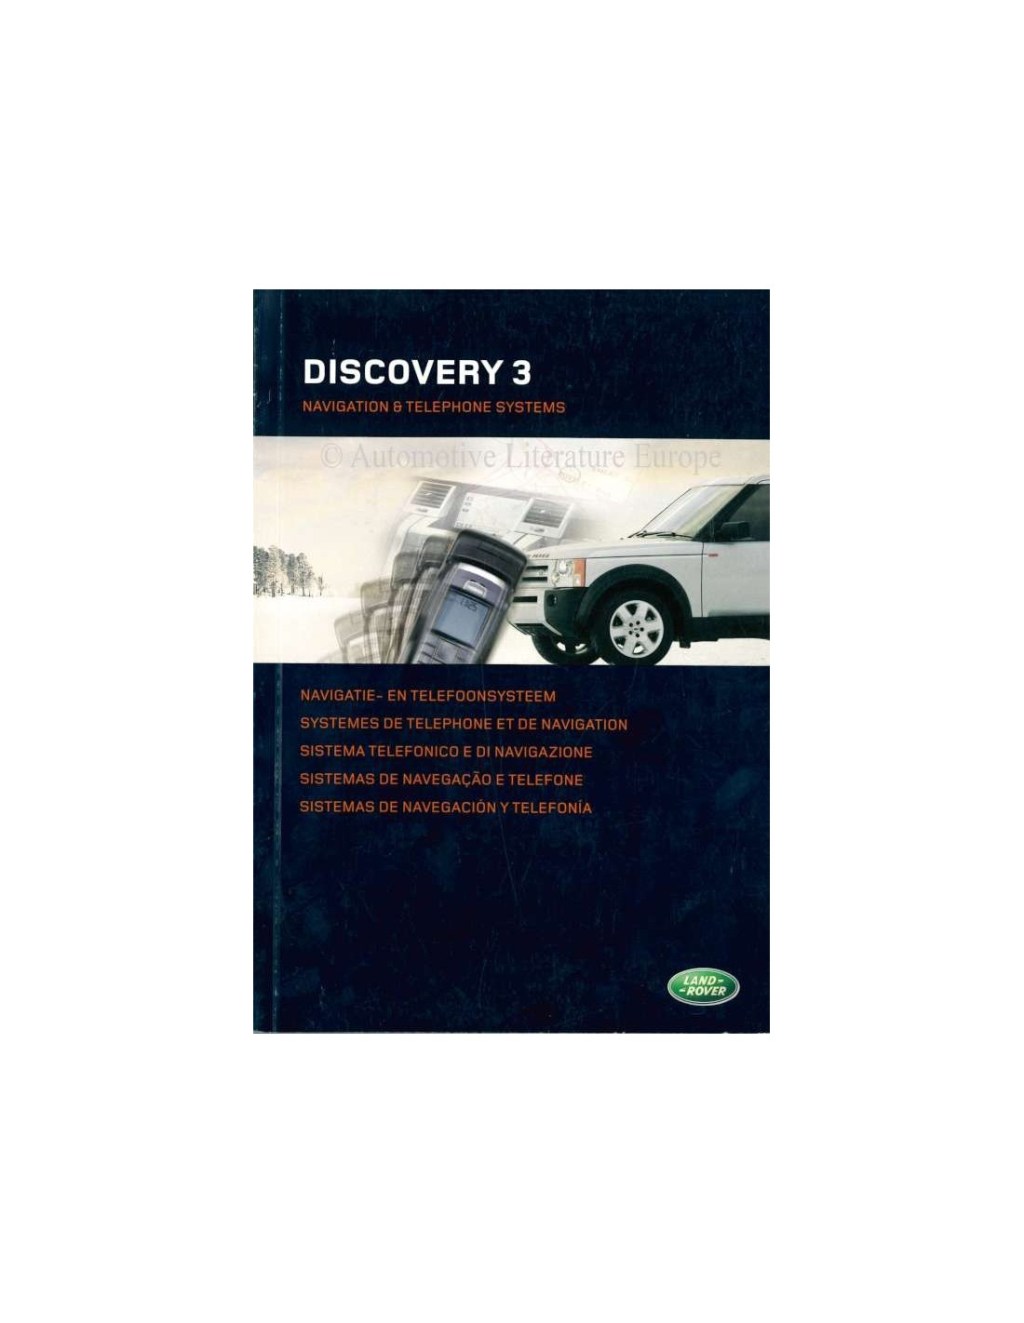 Picture of: LAND ROVER DISCOVERY  NAVIGATIONS- UND TELEFONSYSTEM OWNERS M